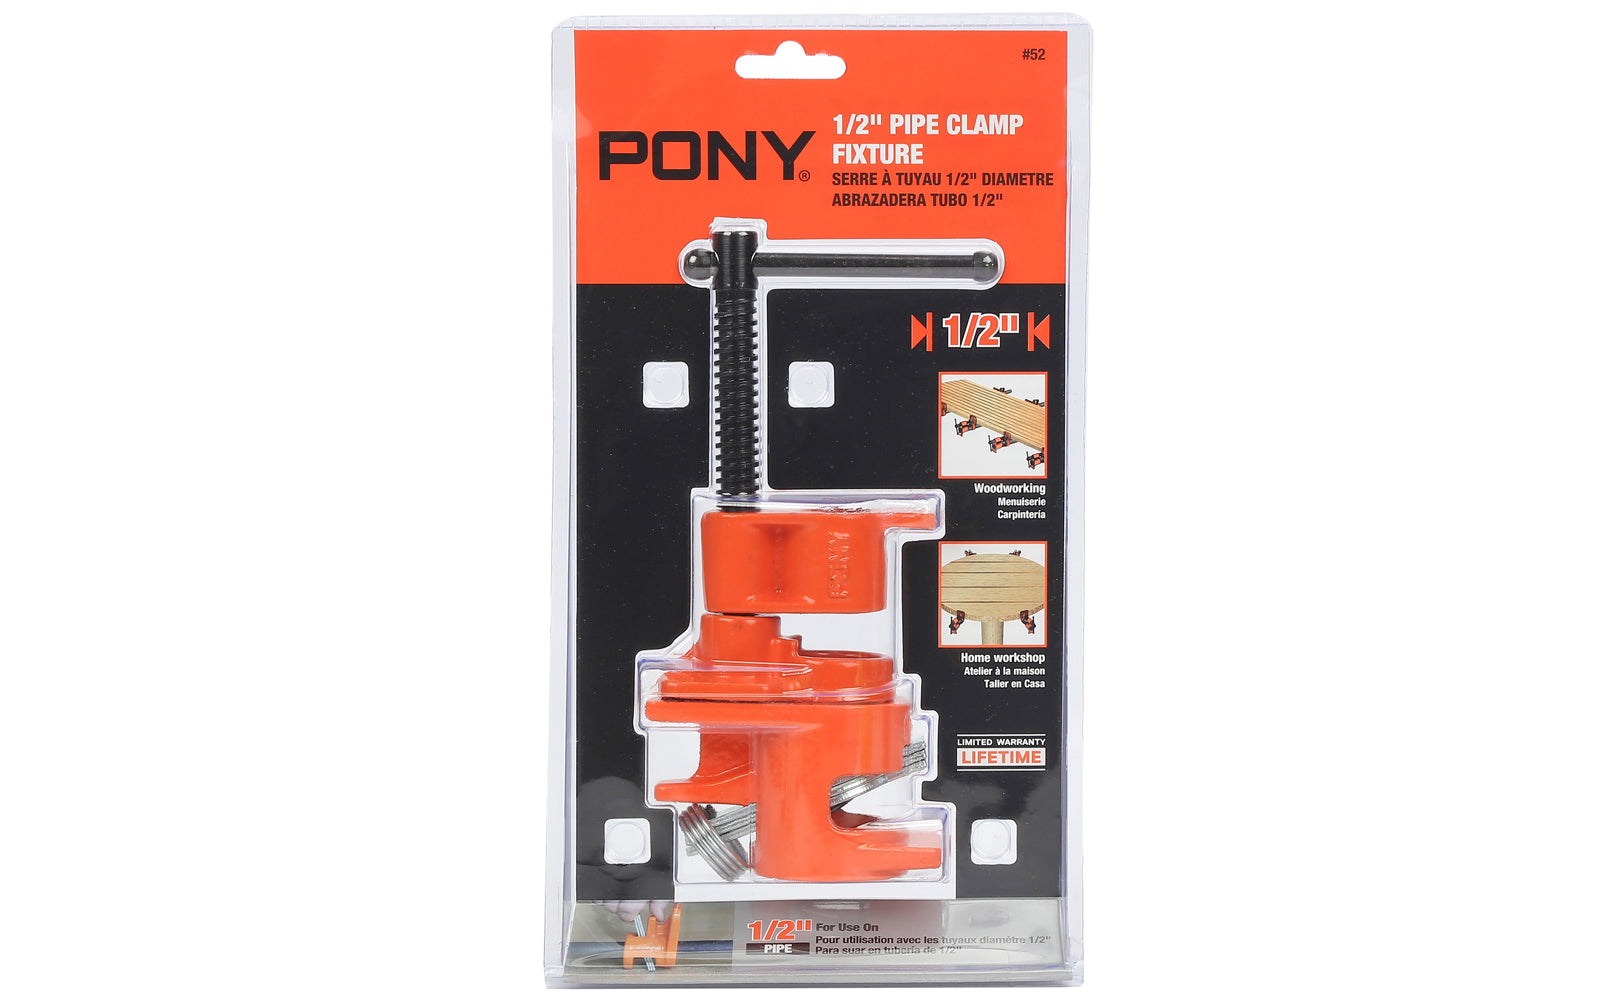 Pony 1/2" Pipe Clamp Fixture ~ No. 52 - Pony Pipe Clamp - Jorgensen Pipe Clamp - 1/2" Pipe clamp - Cast Iron frame & steel hardware - Swivel Handle - #52